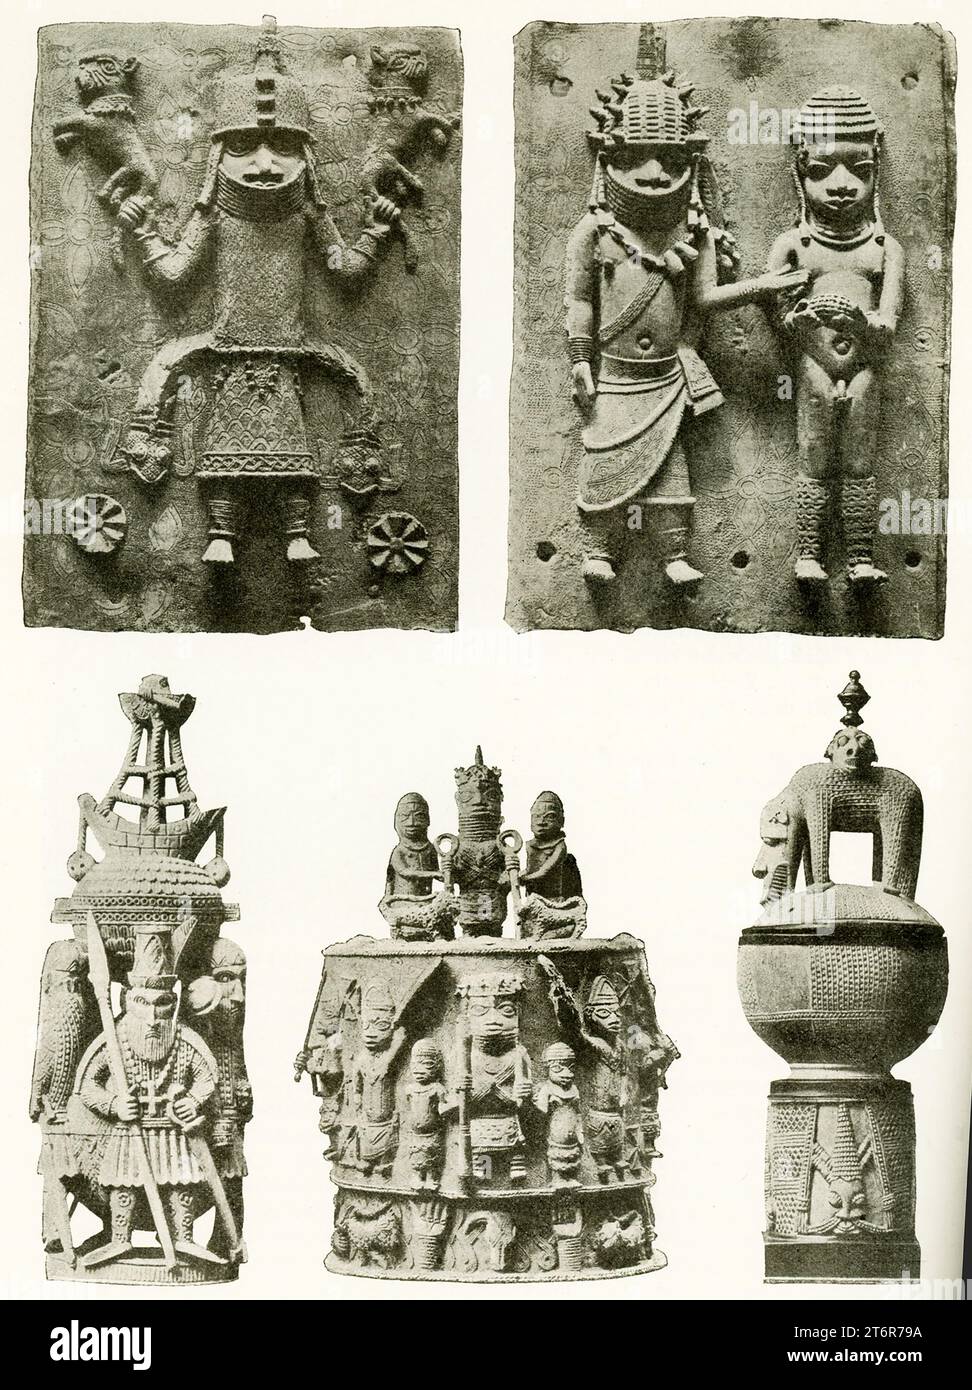 The 1907 caption reads: 'Artworks of the people of the kingdom of Benin on the slave coast [of Africa].' The image appeared in a book published in London in 1899. Benin was an historic kingdom of West Africa (modern Nigeria) that flourished between the 13th and 19th centuries. Descendants of the ruling dynasty still serve as kings, or obas, although only as advisors to the government of Nigeria. Stock Photo